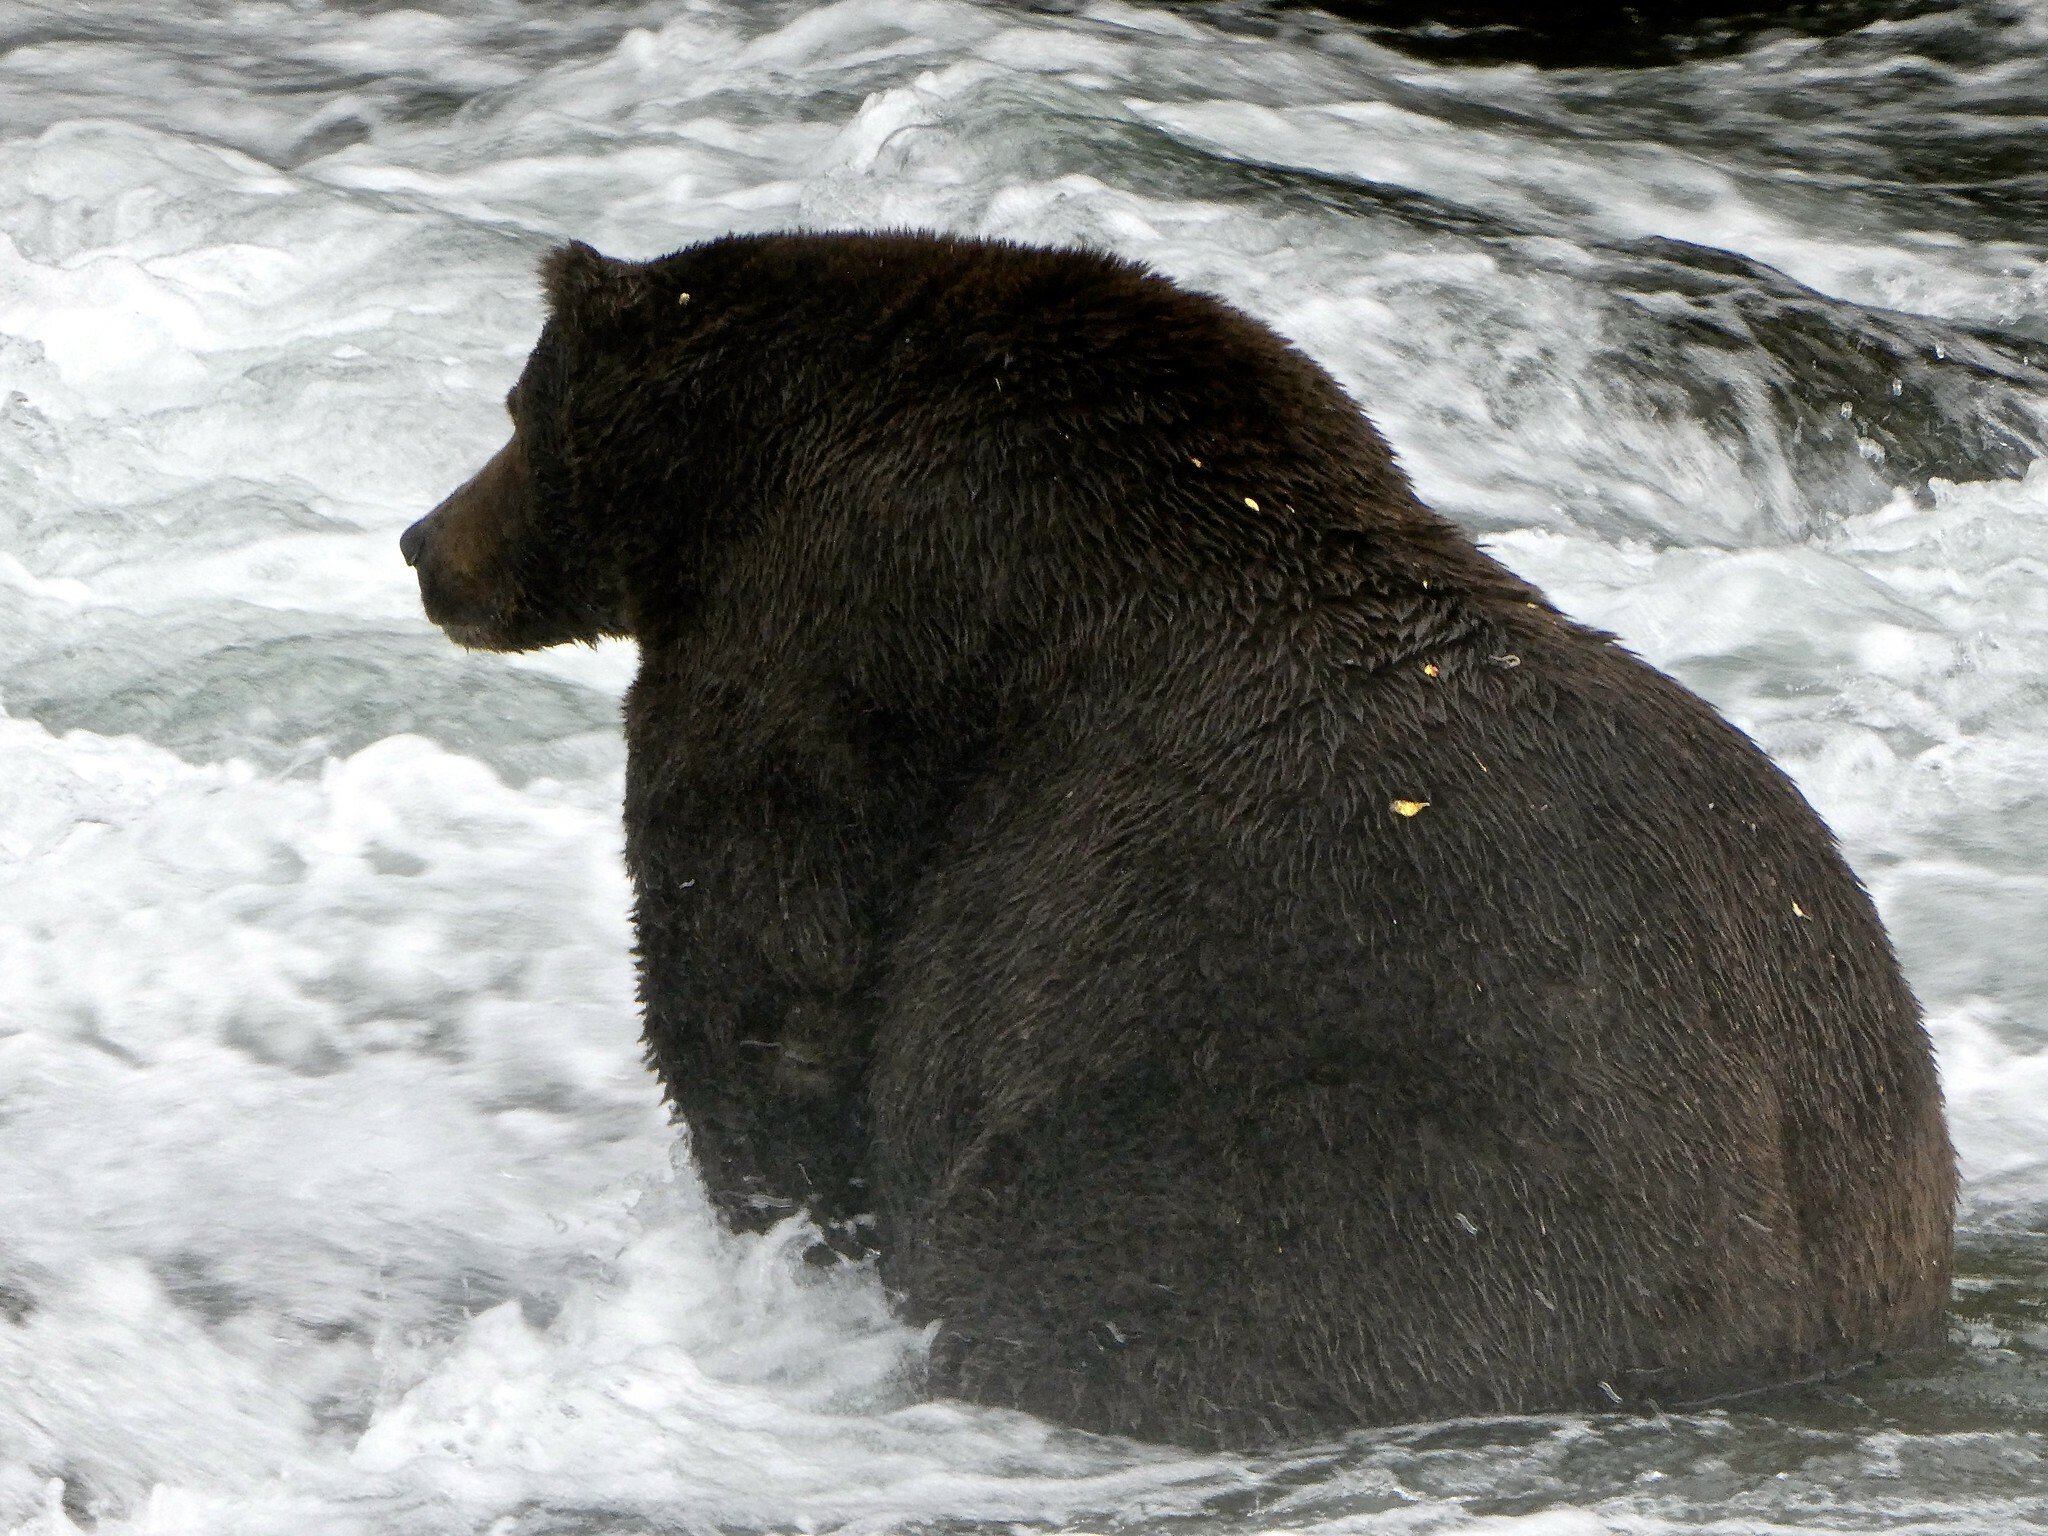 You’ve got to see how fat the very fat bears already are